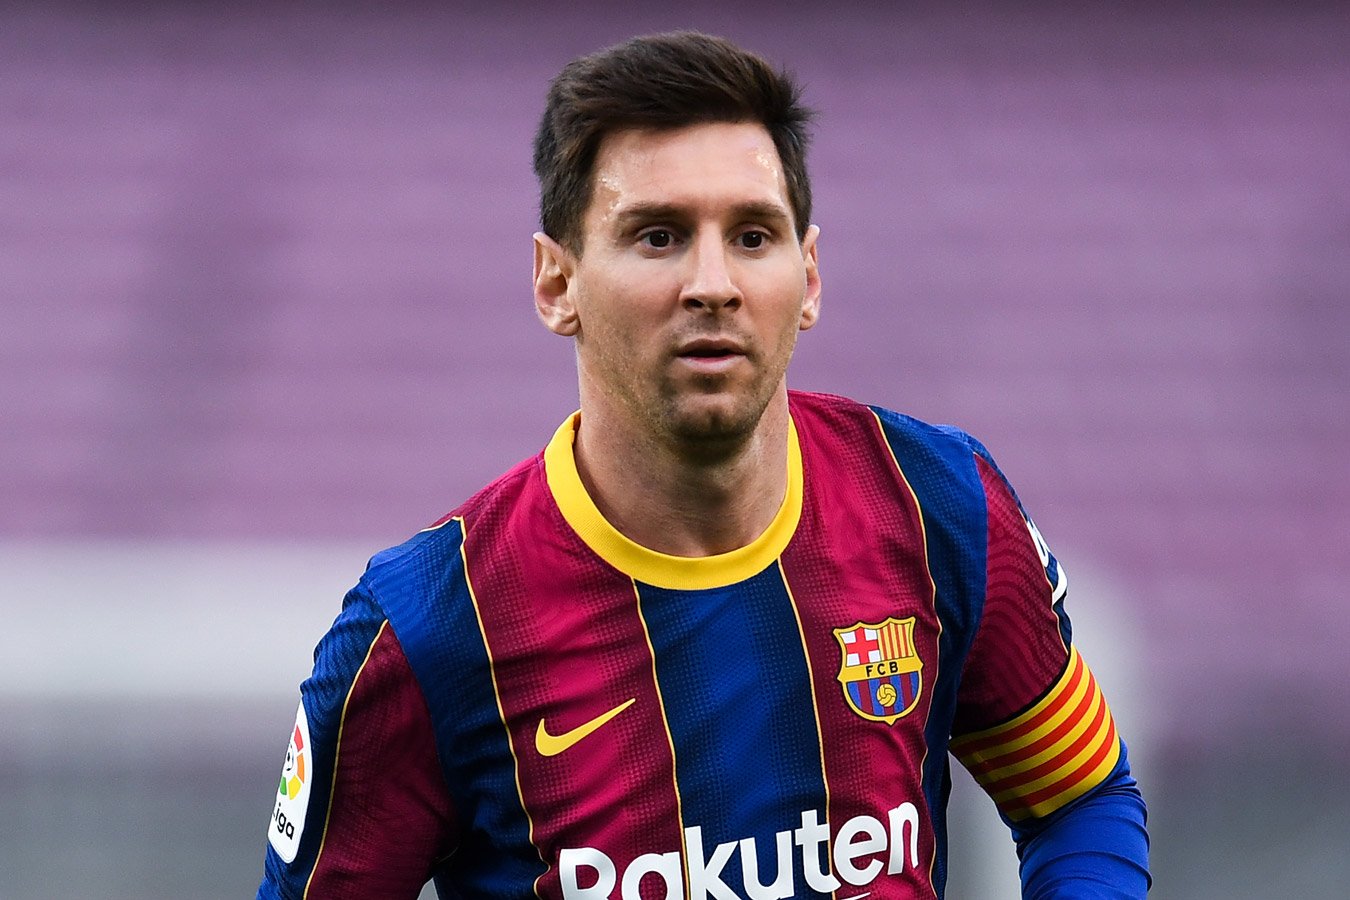 32 interesting facts about Lionel Messi